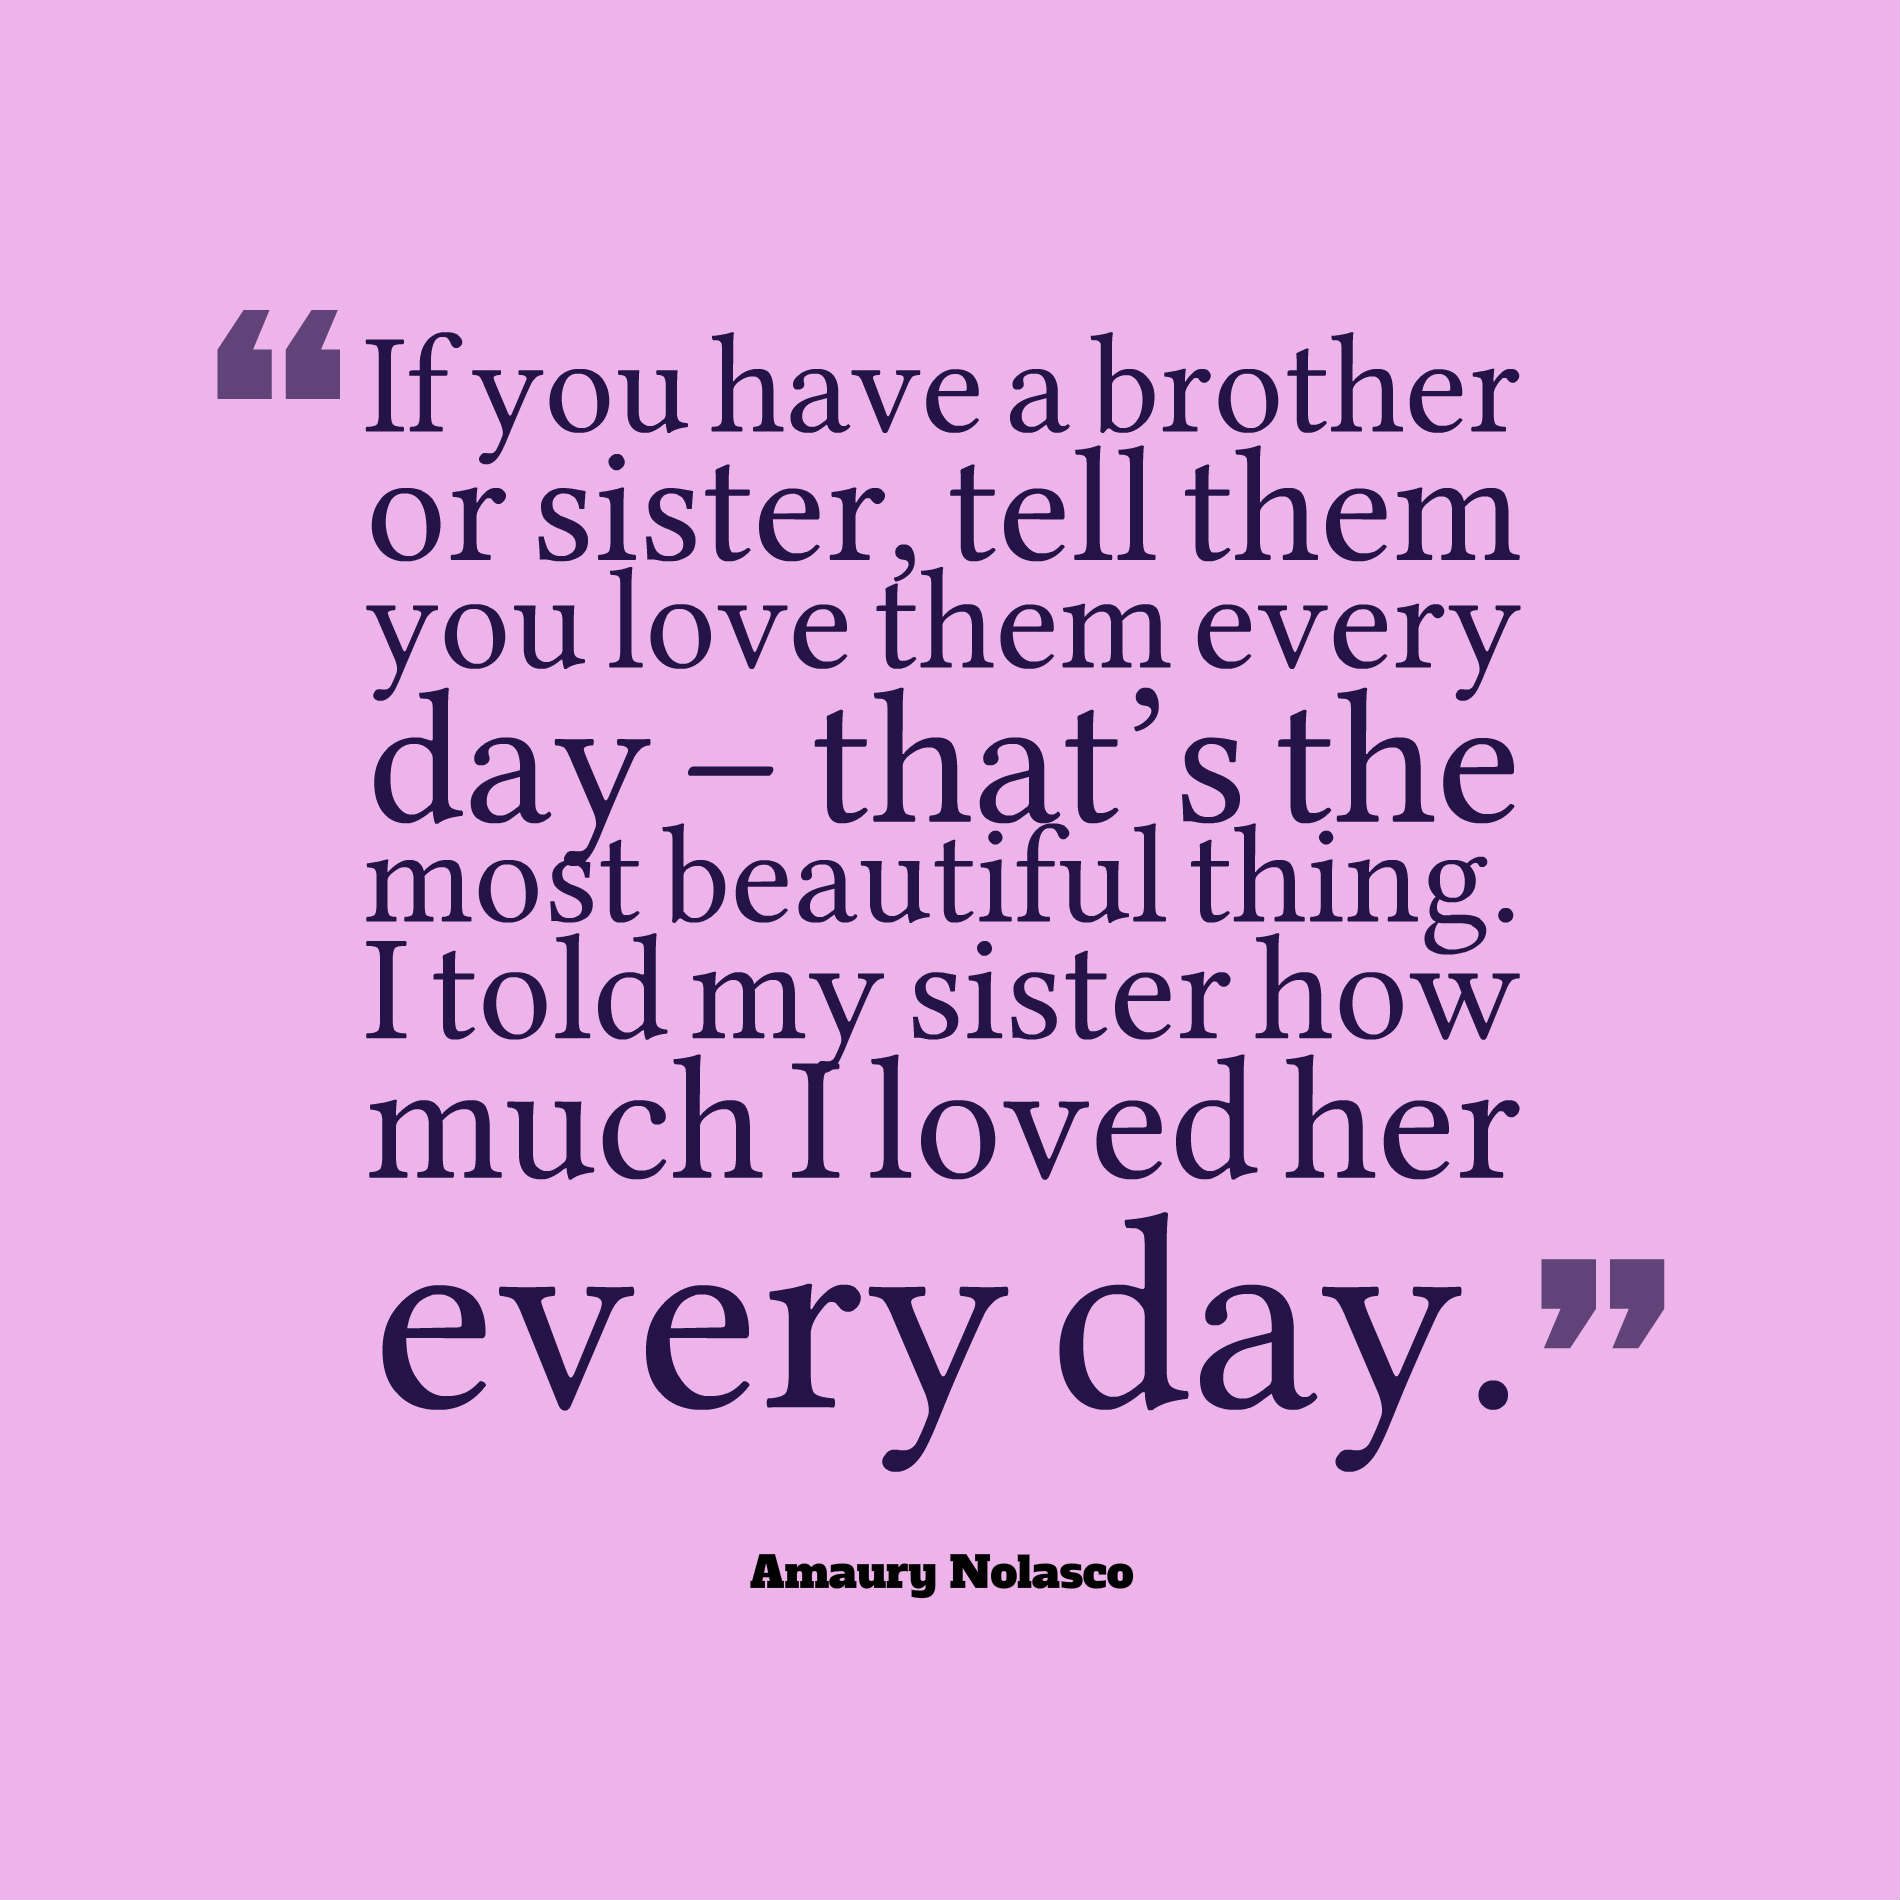 If you have a brother or sister, tell them you love them every day – that’s the most beautiful thing. I told my sister how much I loved her every day.